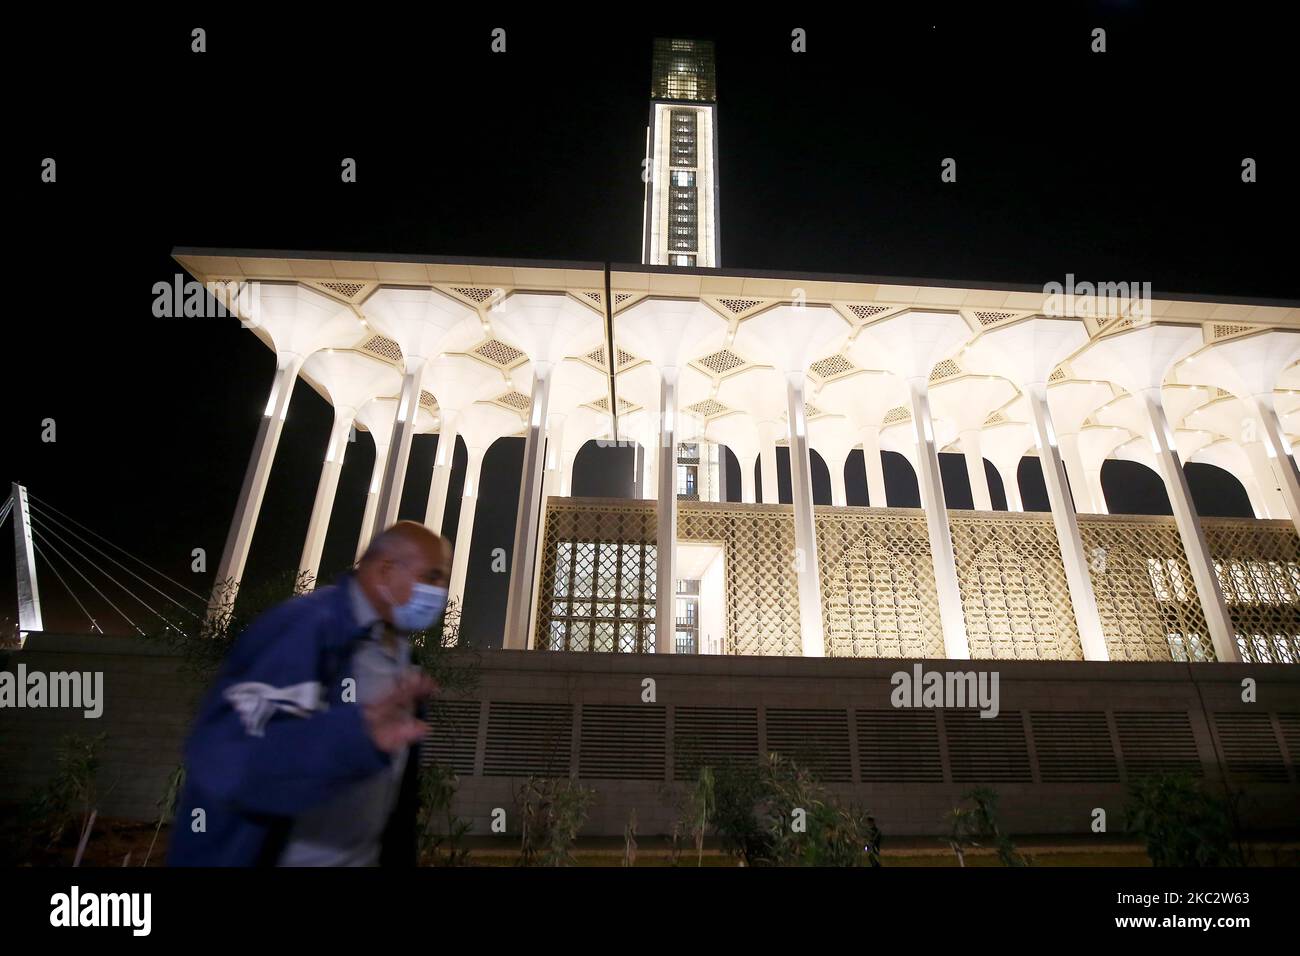 October 28, 2020, Algeria, Algiers: an exterior view of the Great Mosque of Algiers, also known as Djamaa el Djazair. The Great Mosque of Algiers was designed by the German architectural firm KSP Juergen Engel Architekten and engineers from Krebs und Kiefer International and built by the China State Construction Engineering Corporation (CSCEC). The mosque, considered one of the largest mosques in the world and home to the tallest minaret in the world, will open for prayer on Thursday on the occasion of Al-Mouled Al-Nabawy and will be officially inaugurated on November 1, the 66th anniversary o Stock Photo